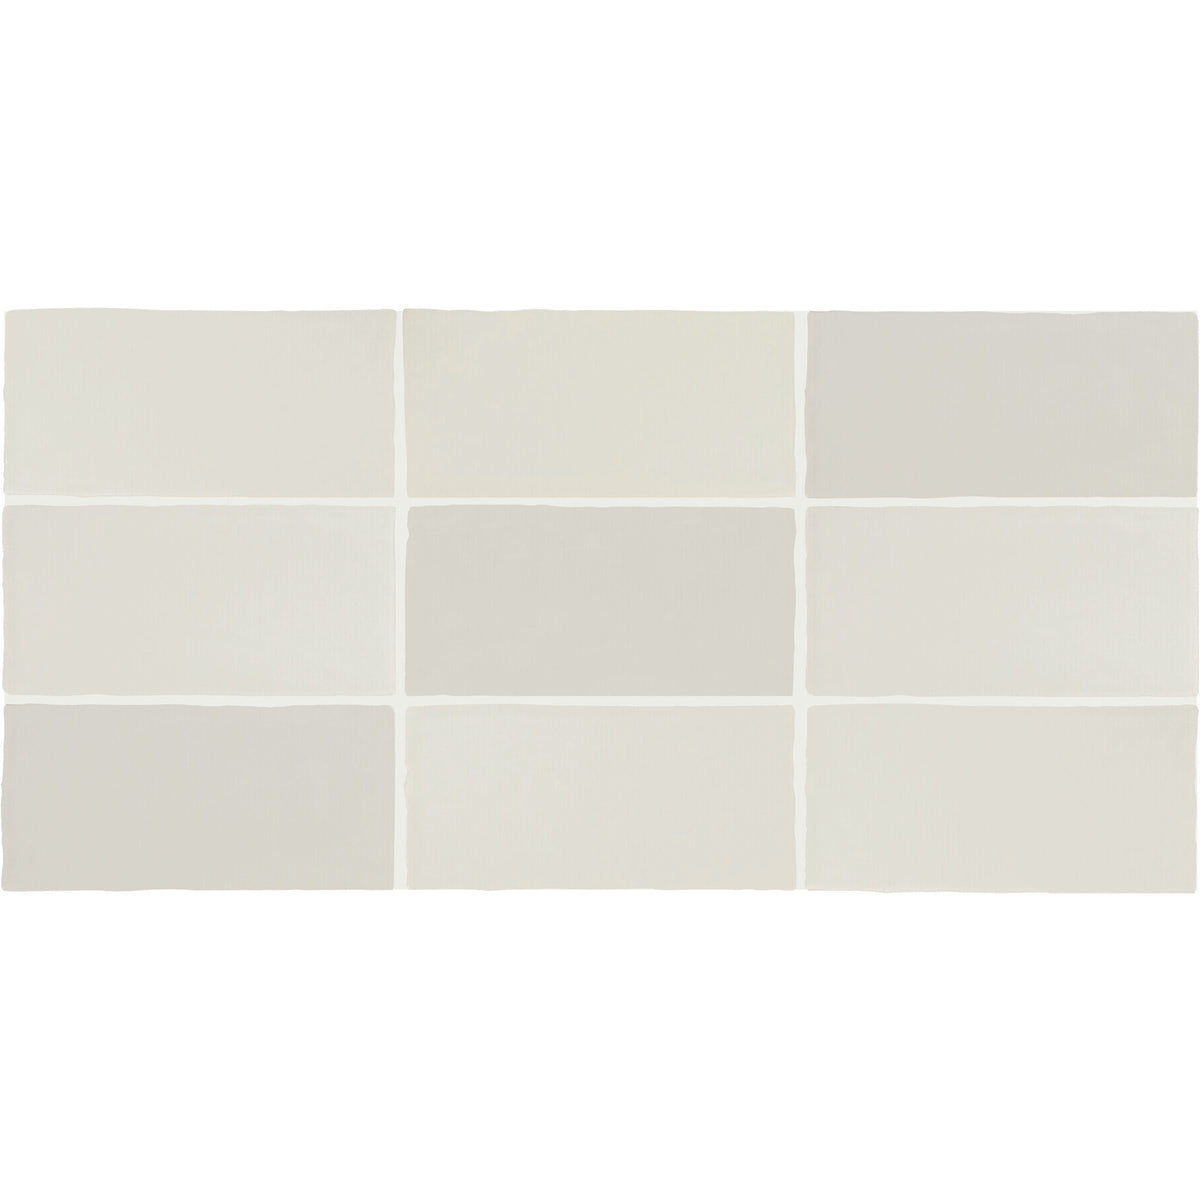 Daltile - Farrier - 2.5 in. x 5 in. Glazed Ceramic Wall Tile - Andalusian Grey Variation View